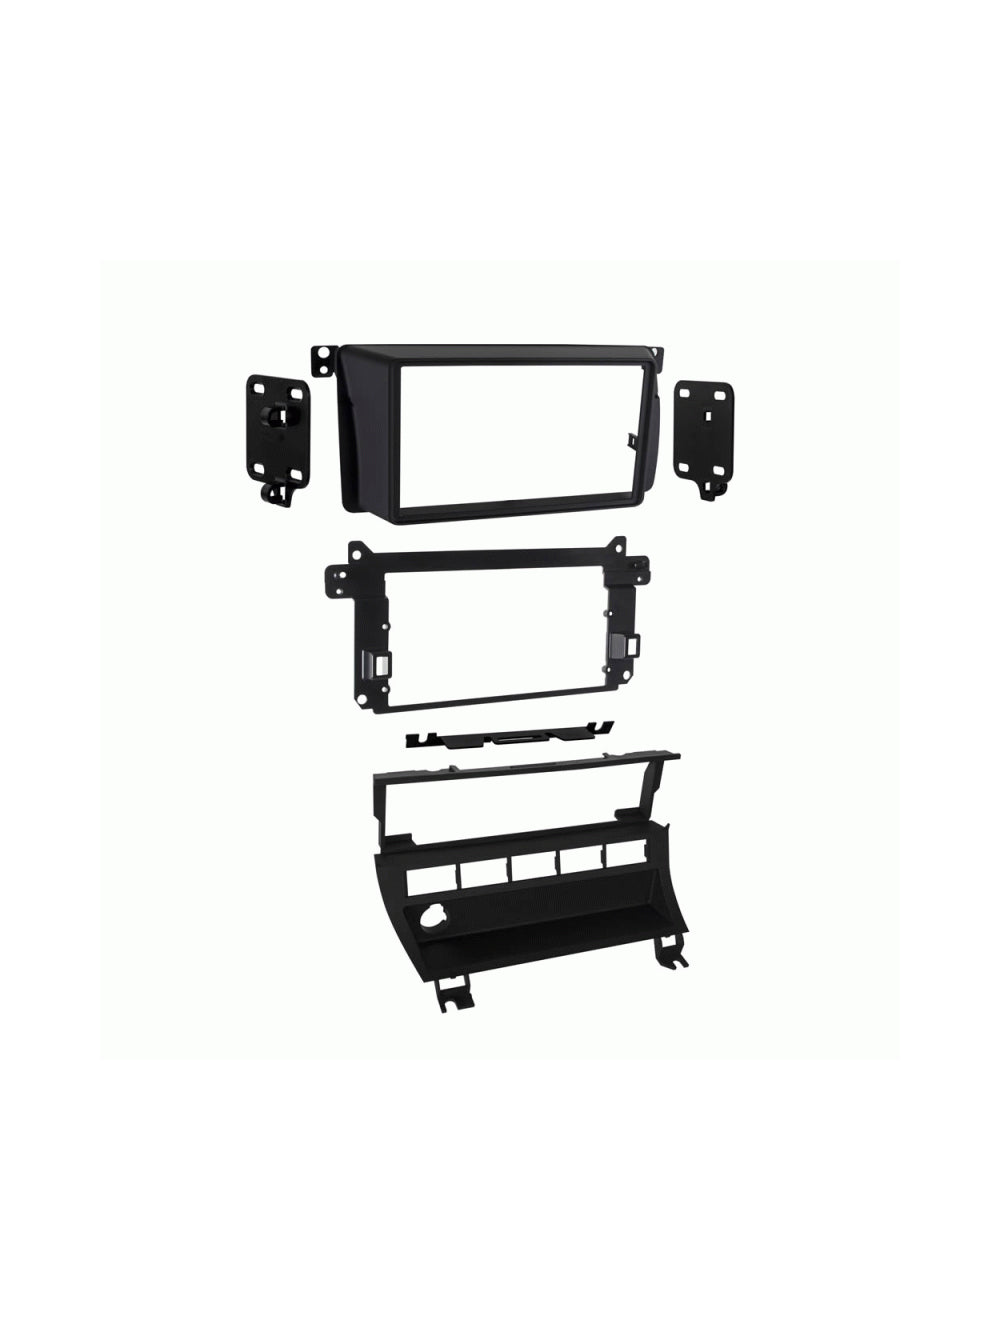 Metra 95-9310B Double DIN Stereo Dash Kit for BMW 3-Series 99-06 w/ 5-Switch Panel